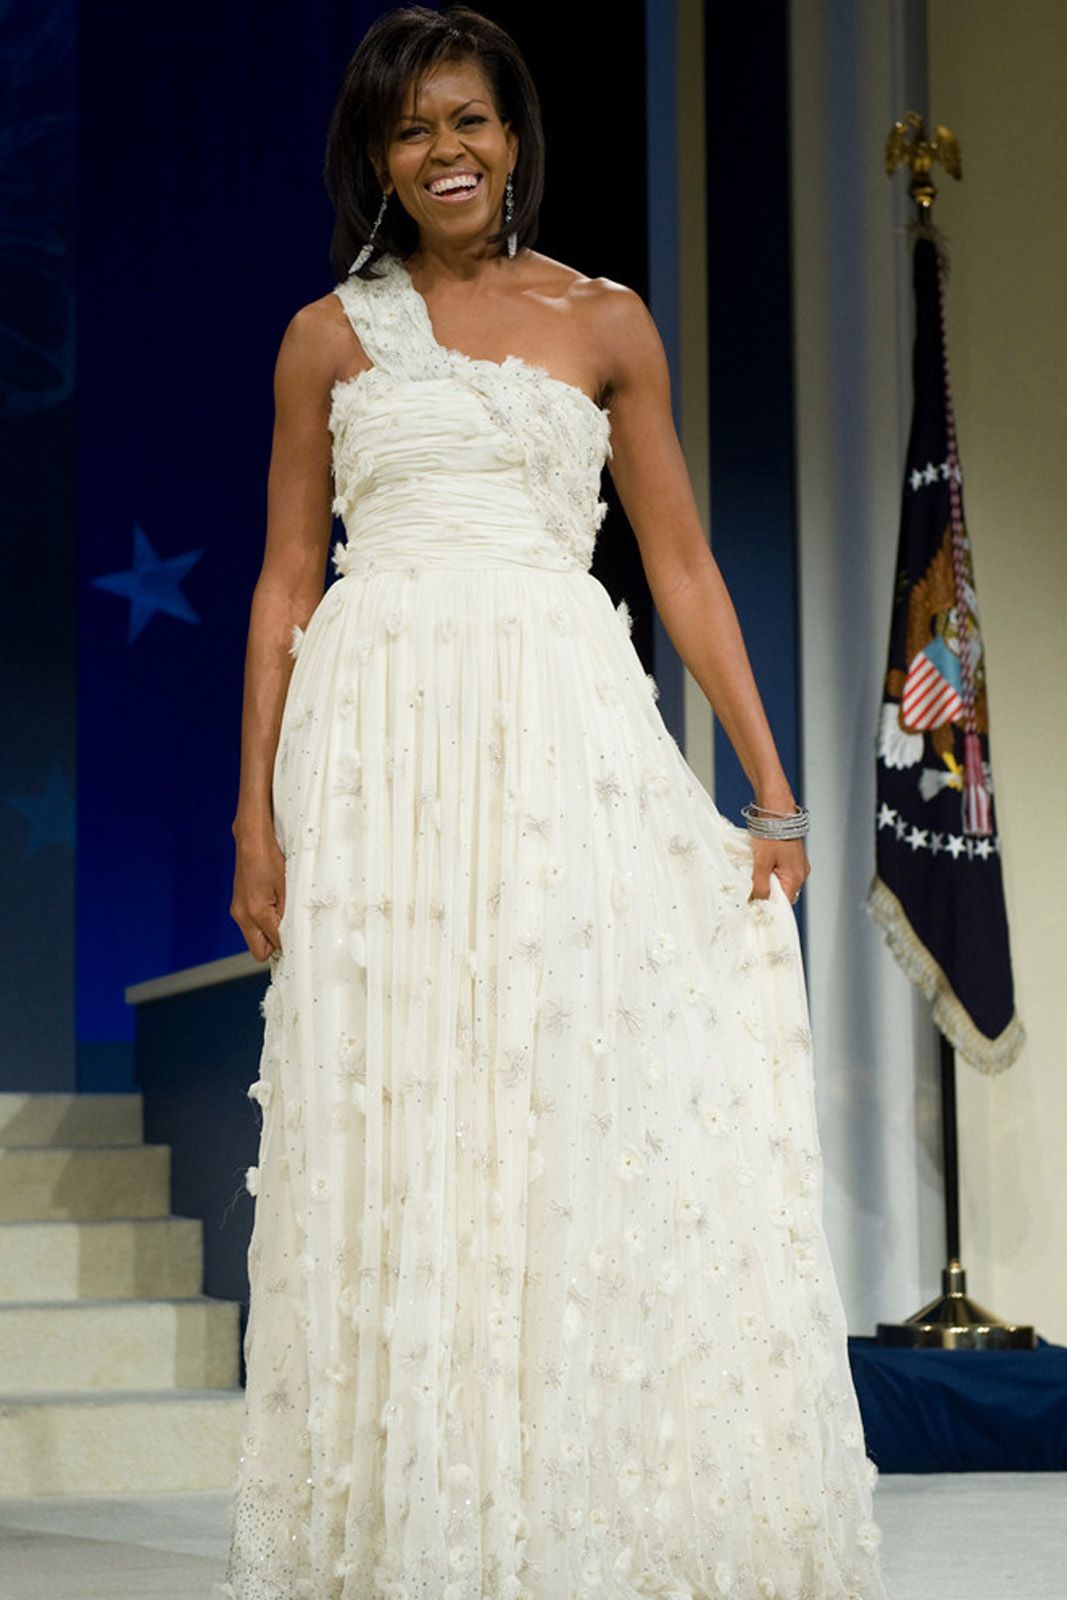 Always Look Stylish, Here Are 5 Michelle Obama's Favorite Designers